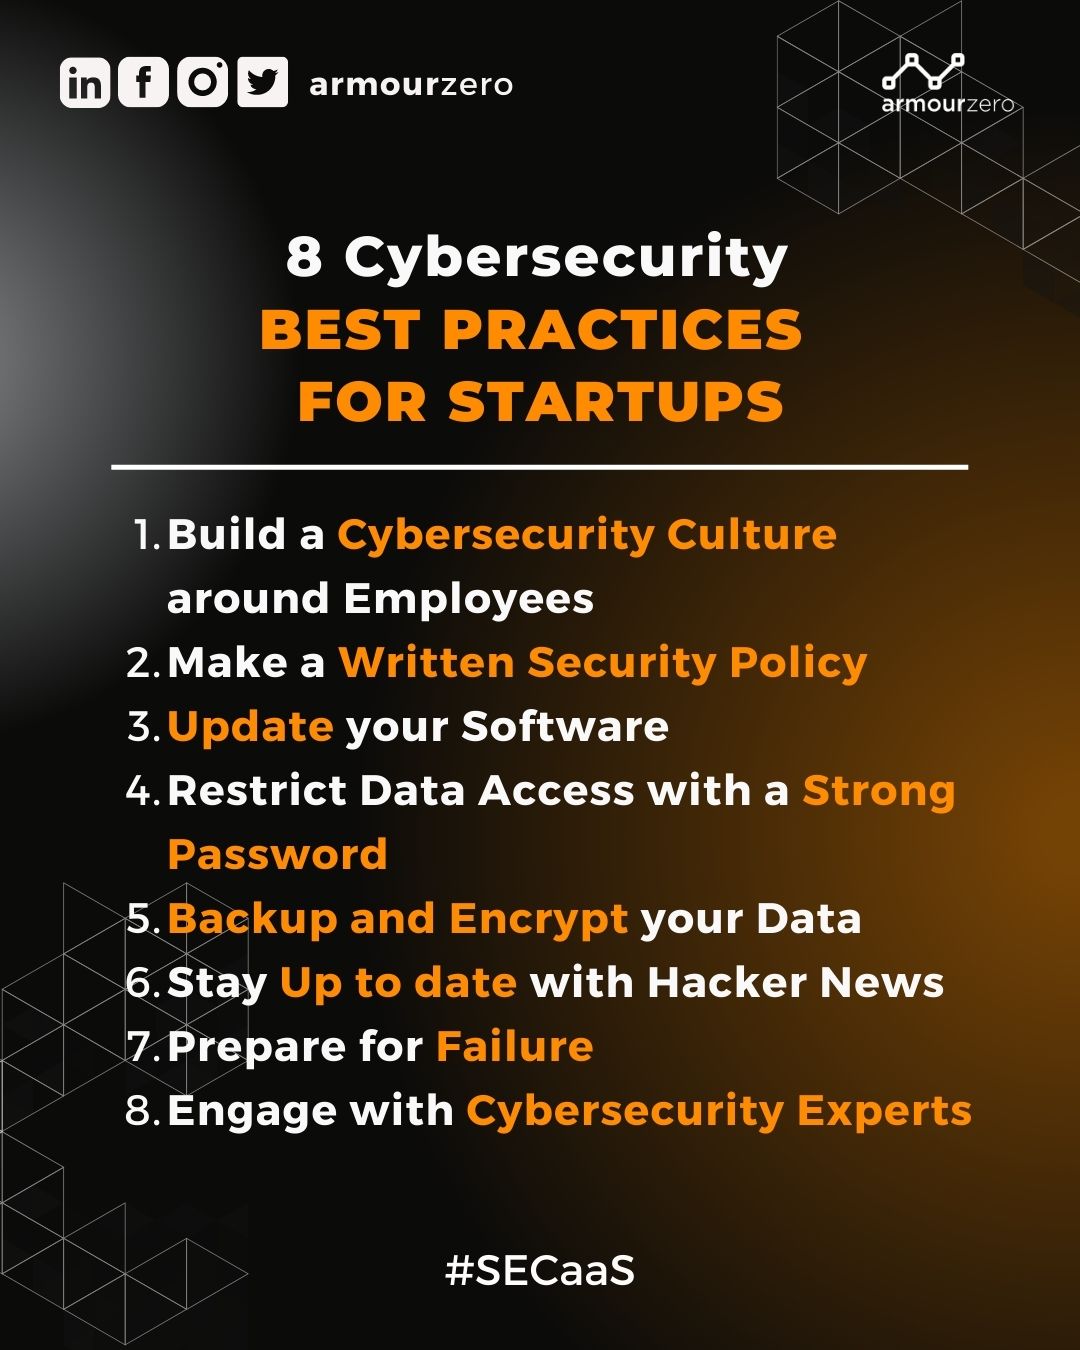 Cybersecurity best practices for startups